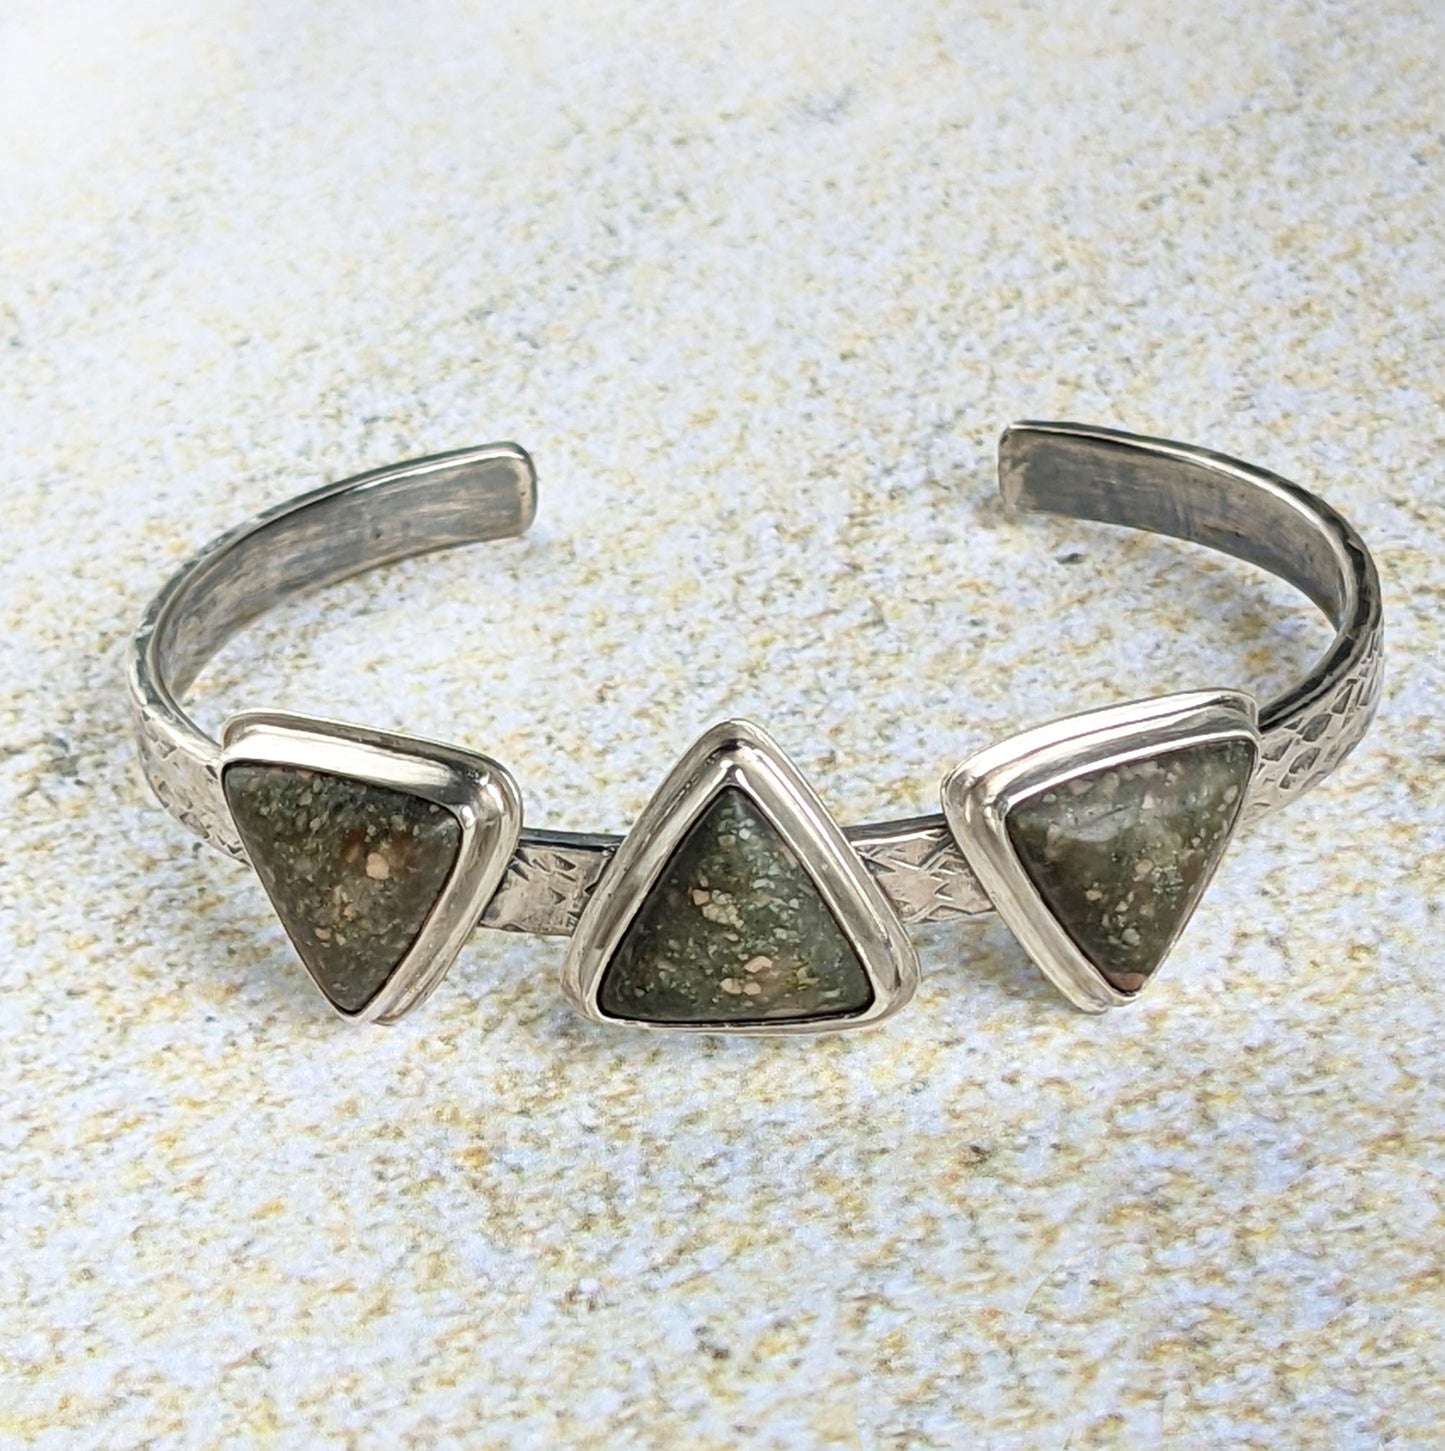 Damele Turquoise Triangles Sterling Silver Cuff Bracelet